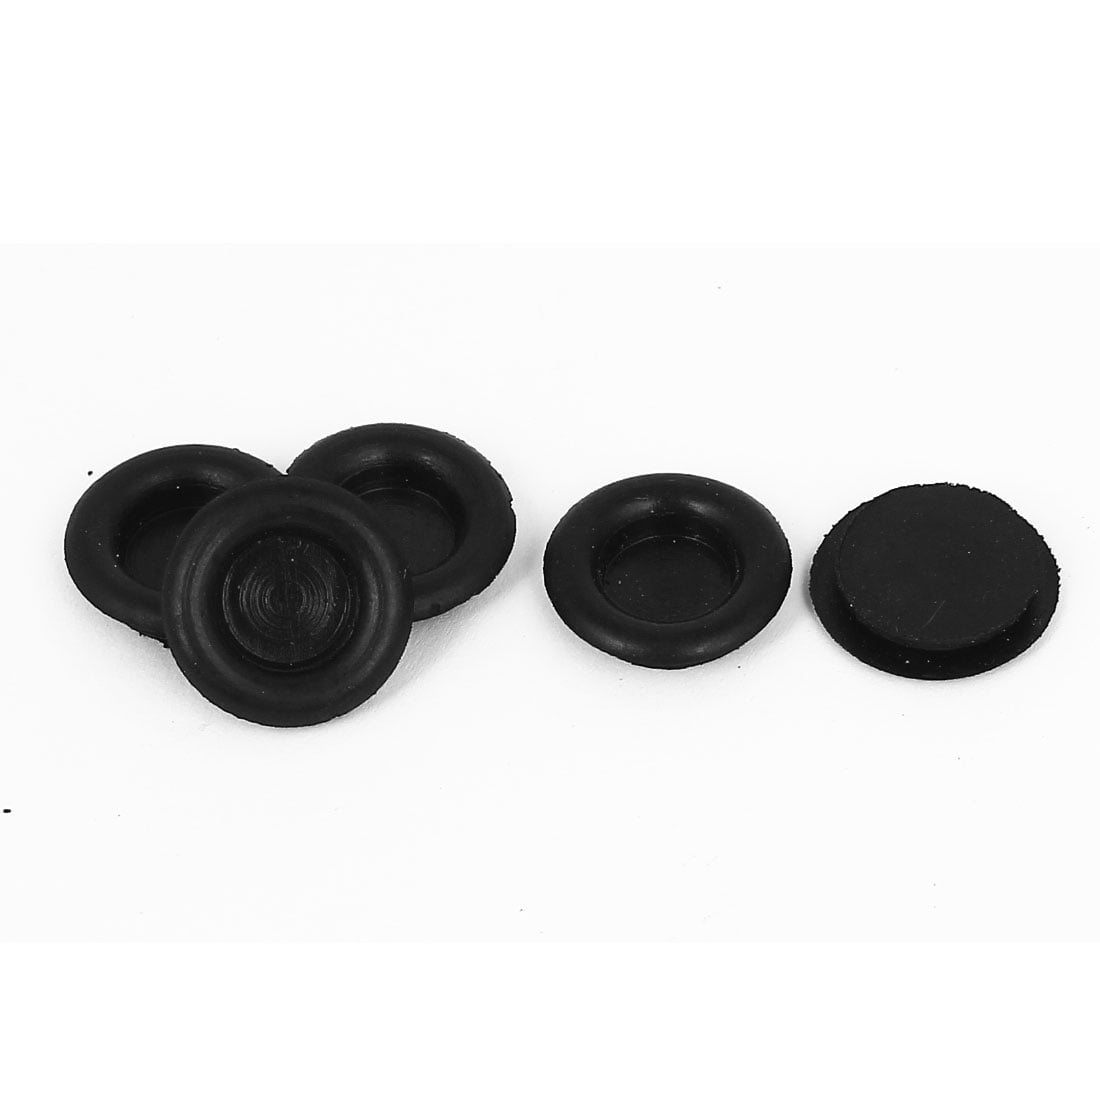 Super & Closed/Blind Rubber Grommets Open 20mm,25mm,32mm Available 